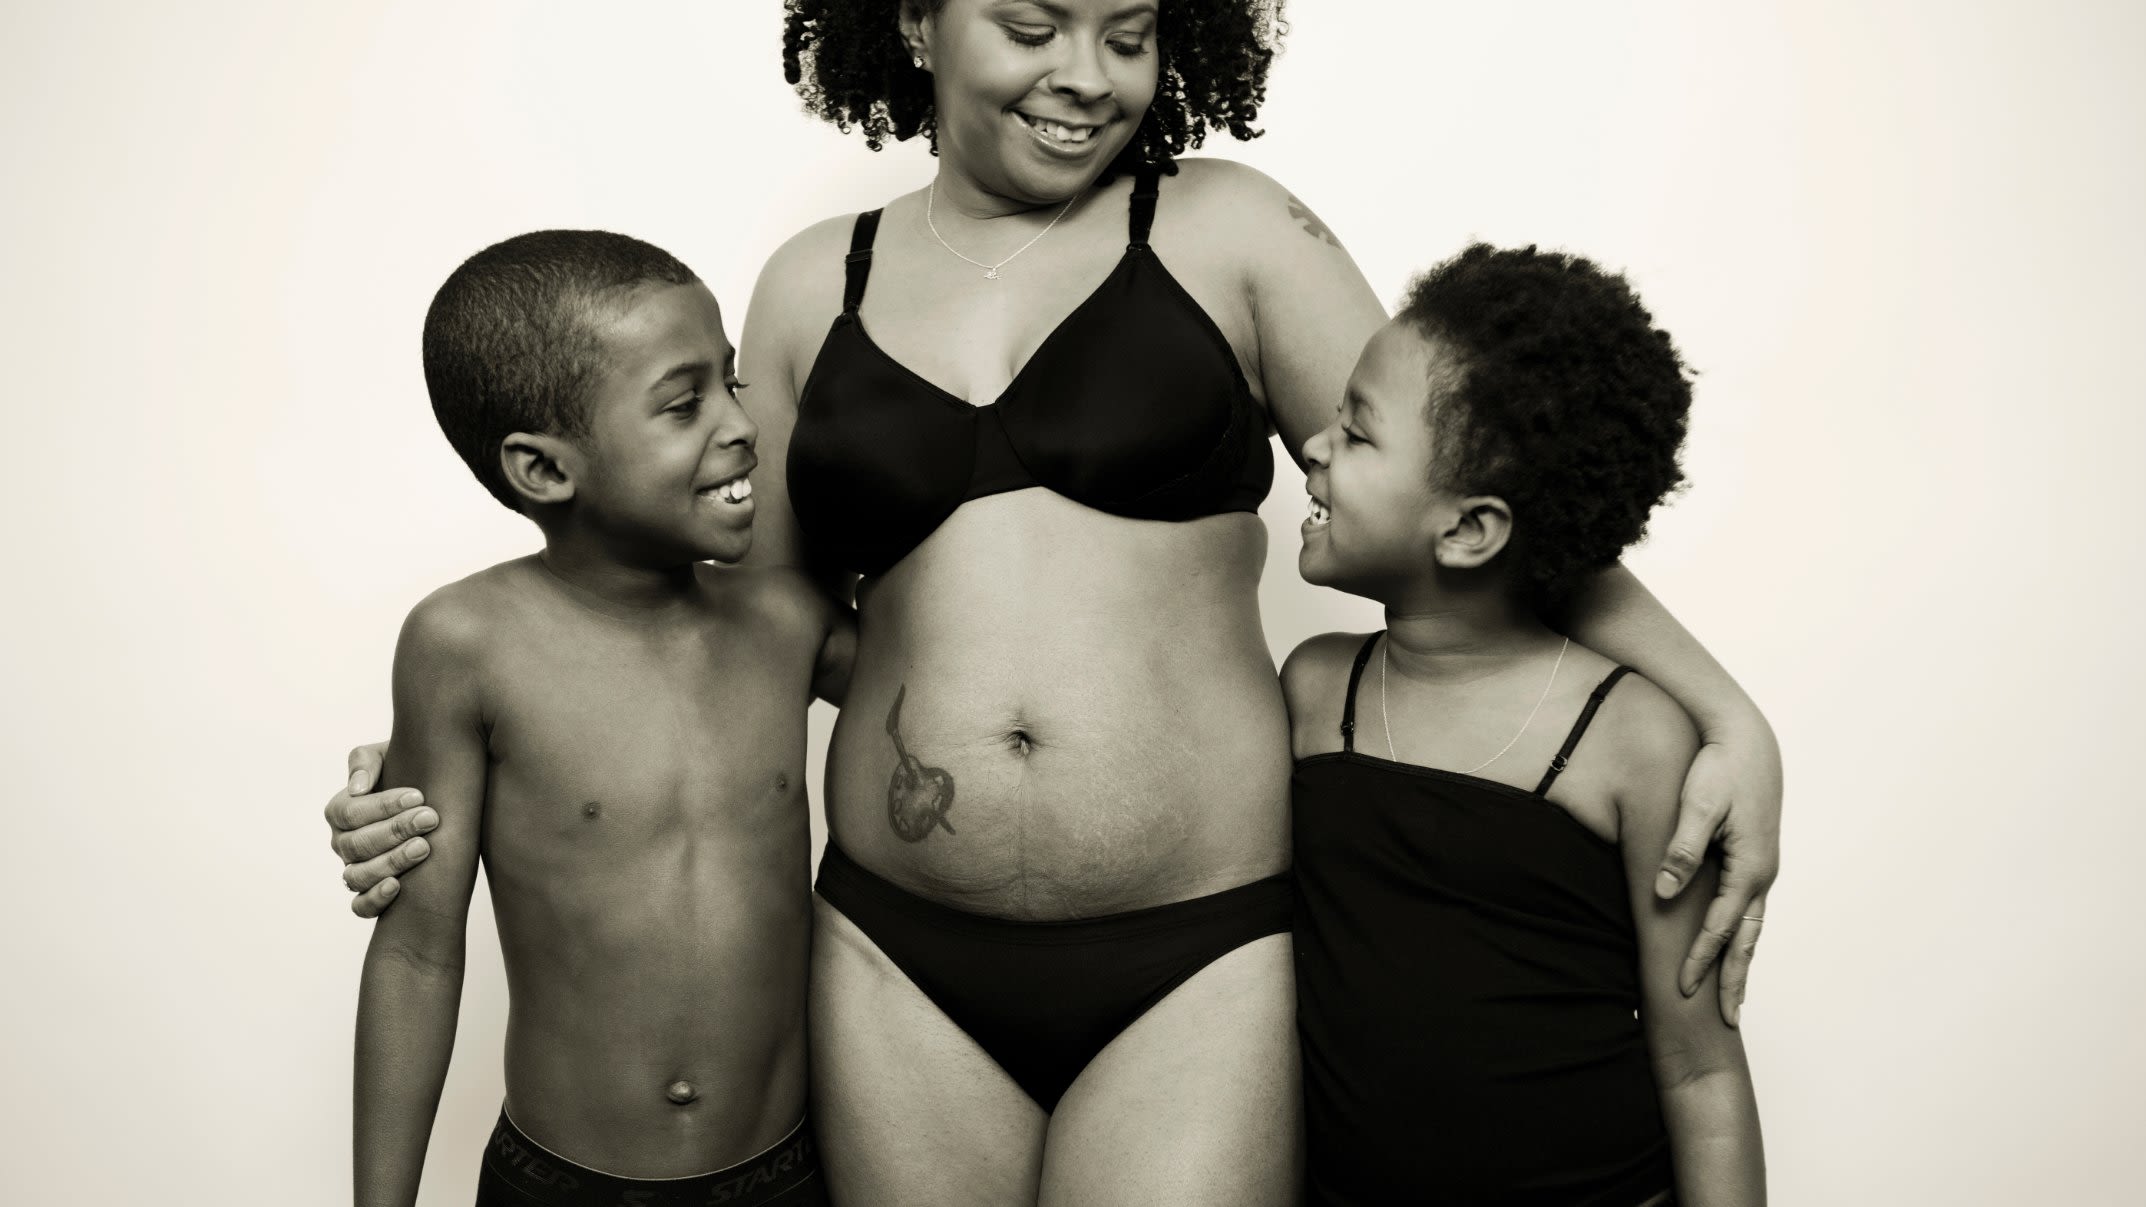 Life After Birth Project Celebrates Postpartum Bodies With Photos